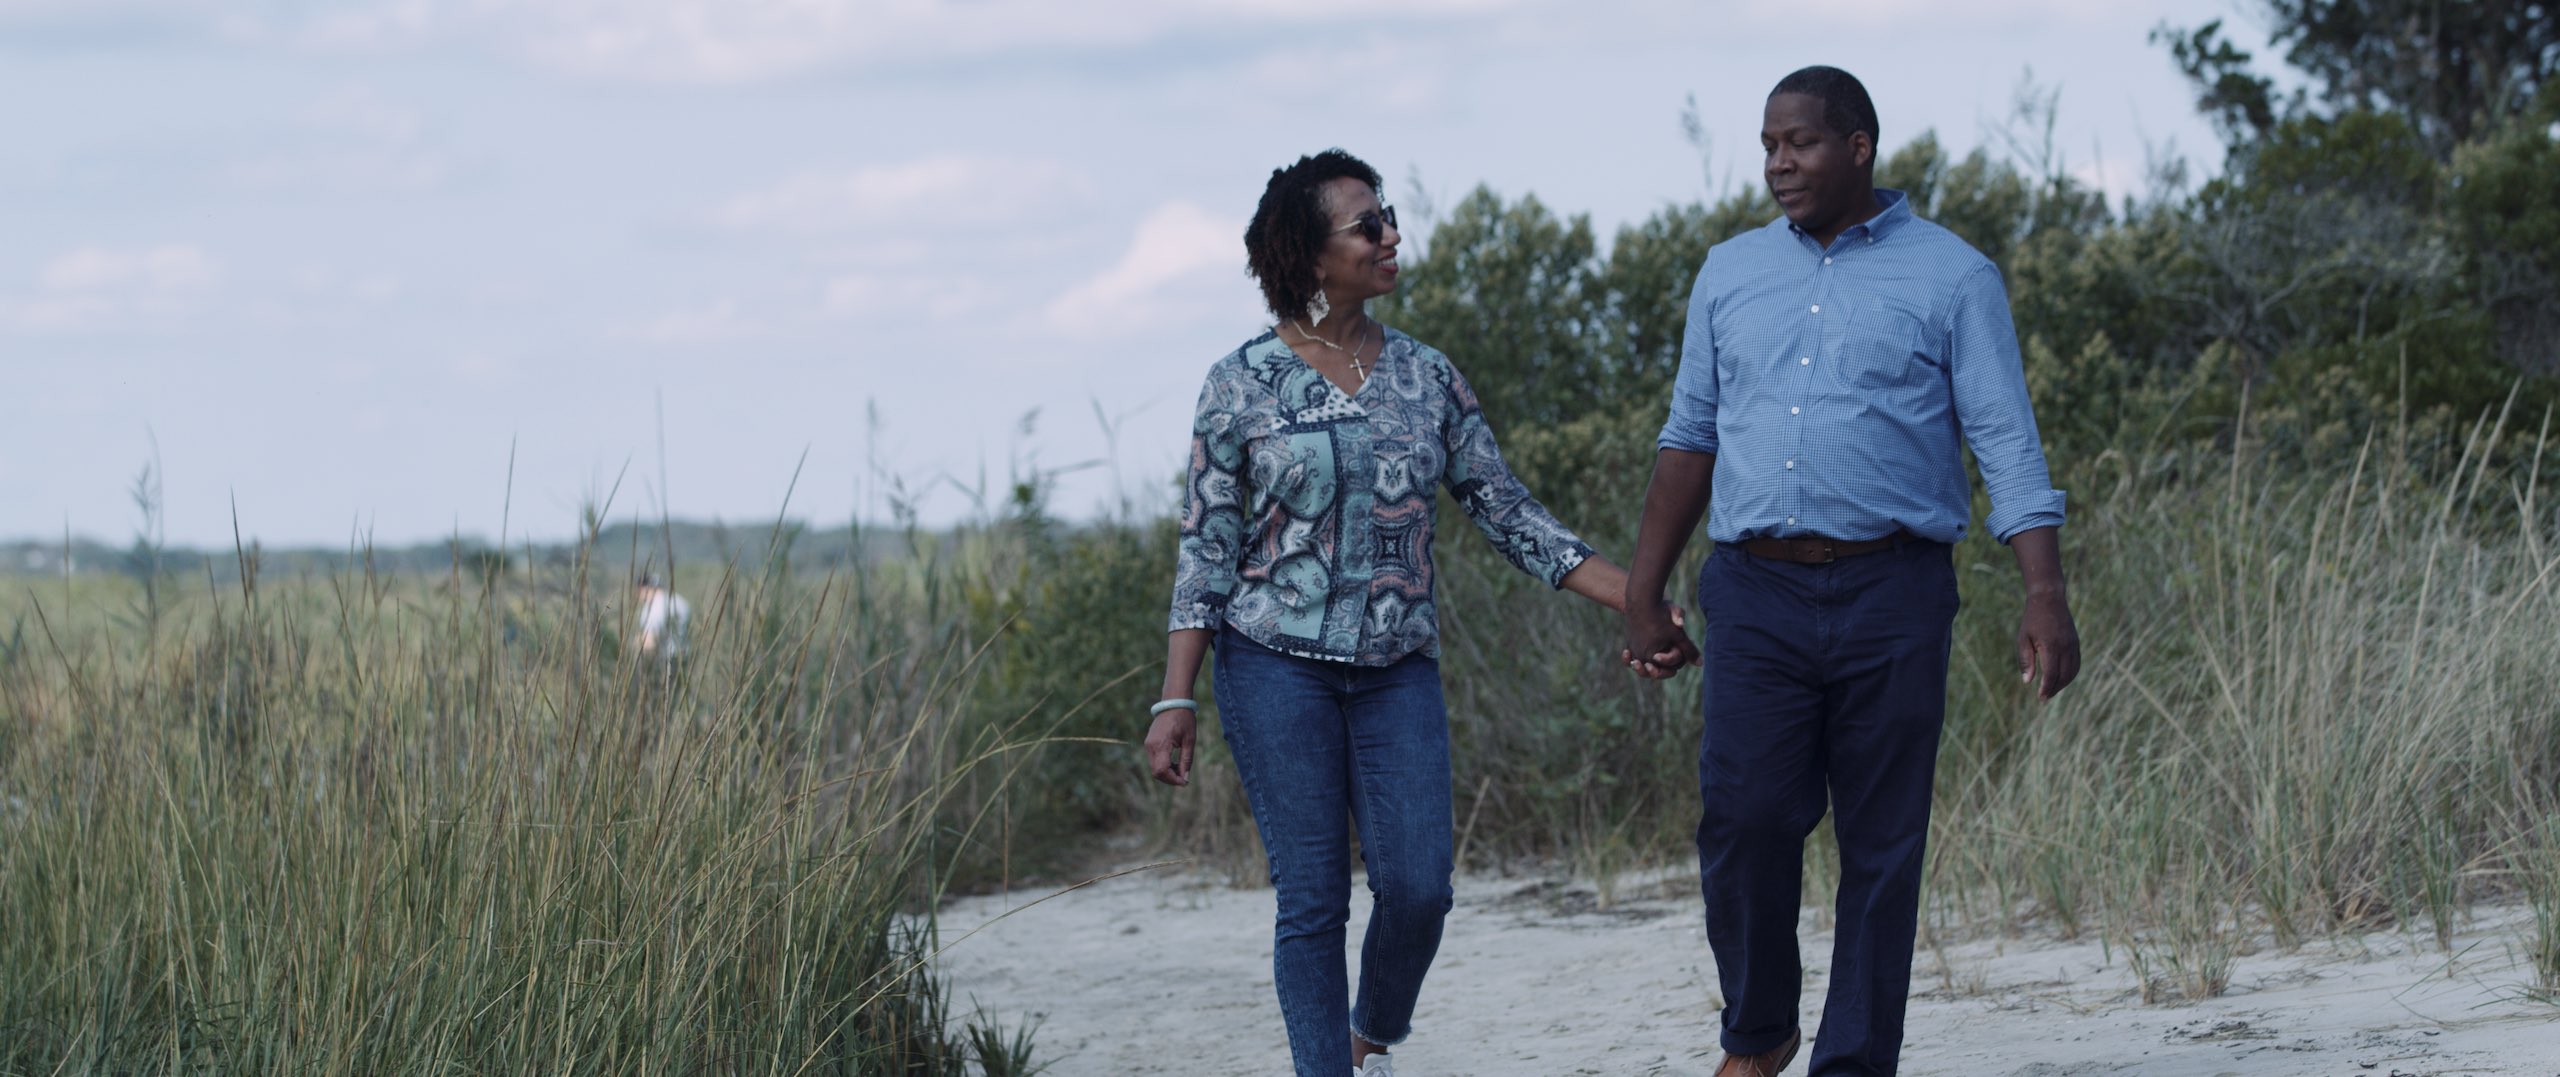 Dailies Political season with 76 Words African American man and woman walking in the sand dunes holding hands